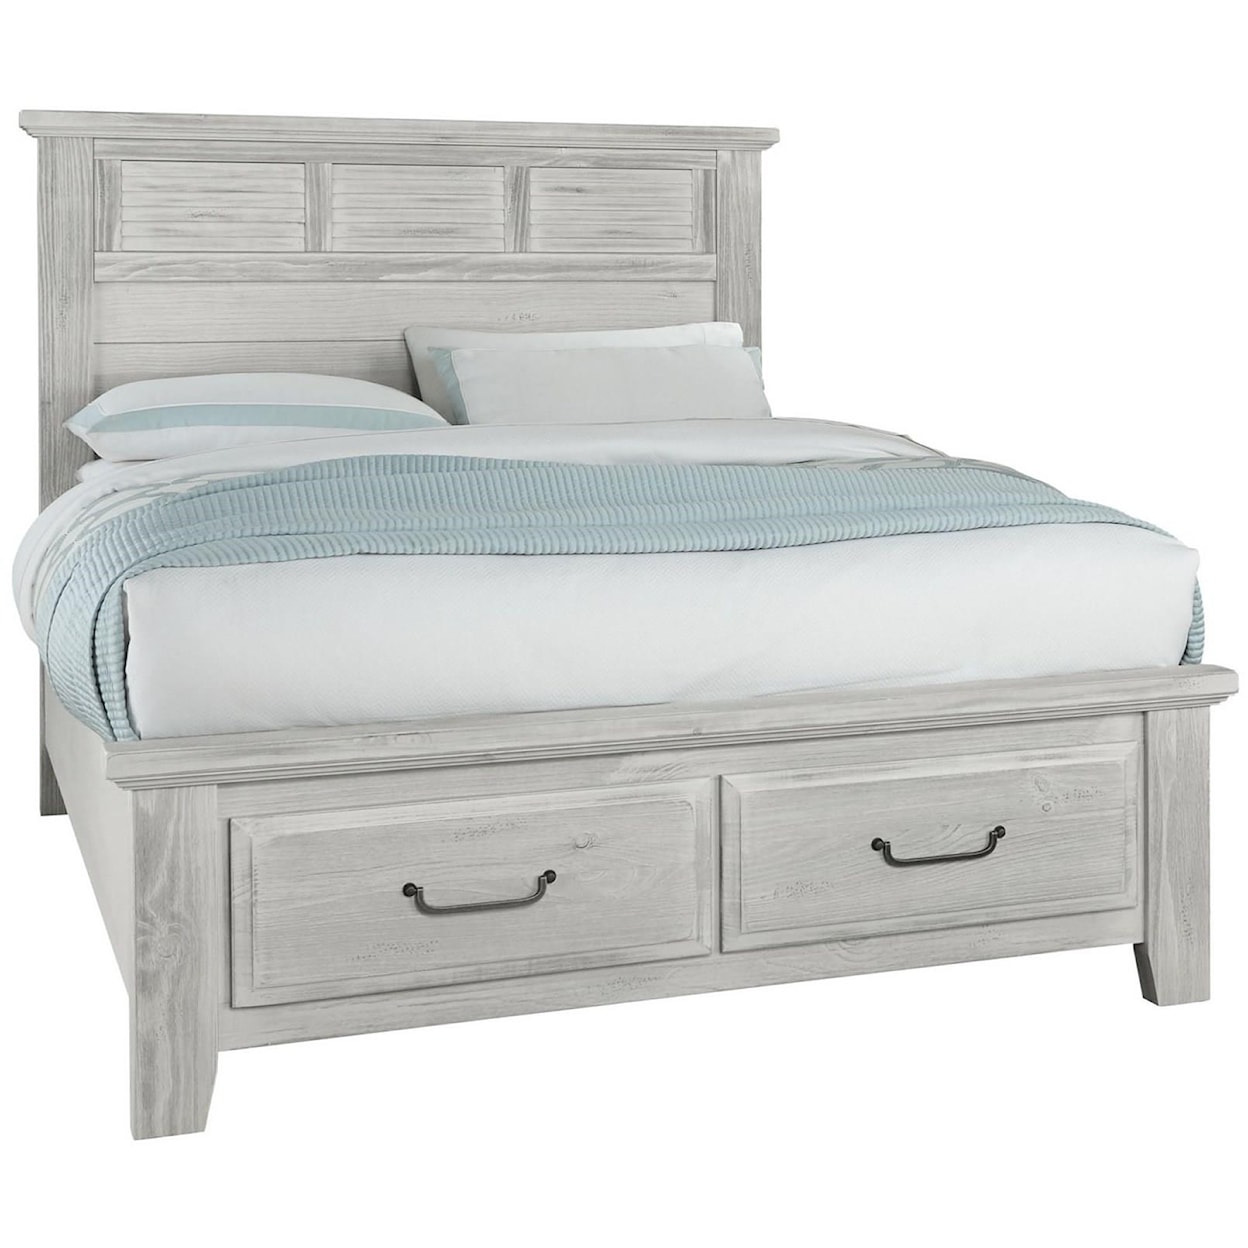 Vaughan Bassett Sawmill 694 559 050b 502 555t Transitional Queen Louver Bed With 2 Drawer